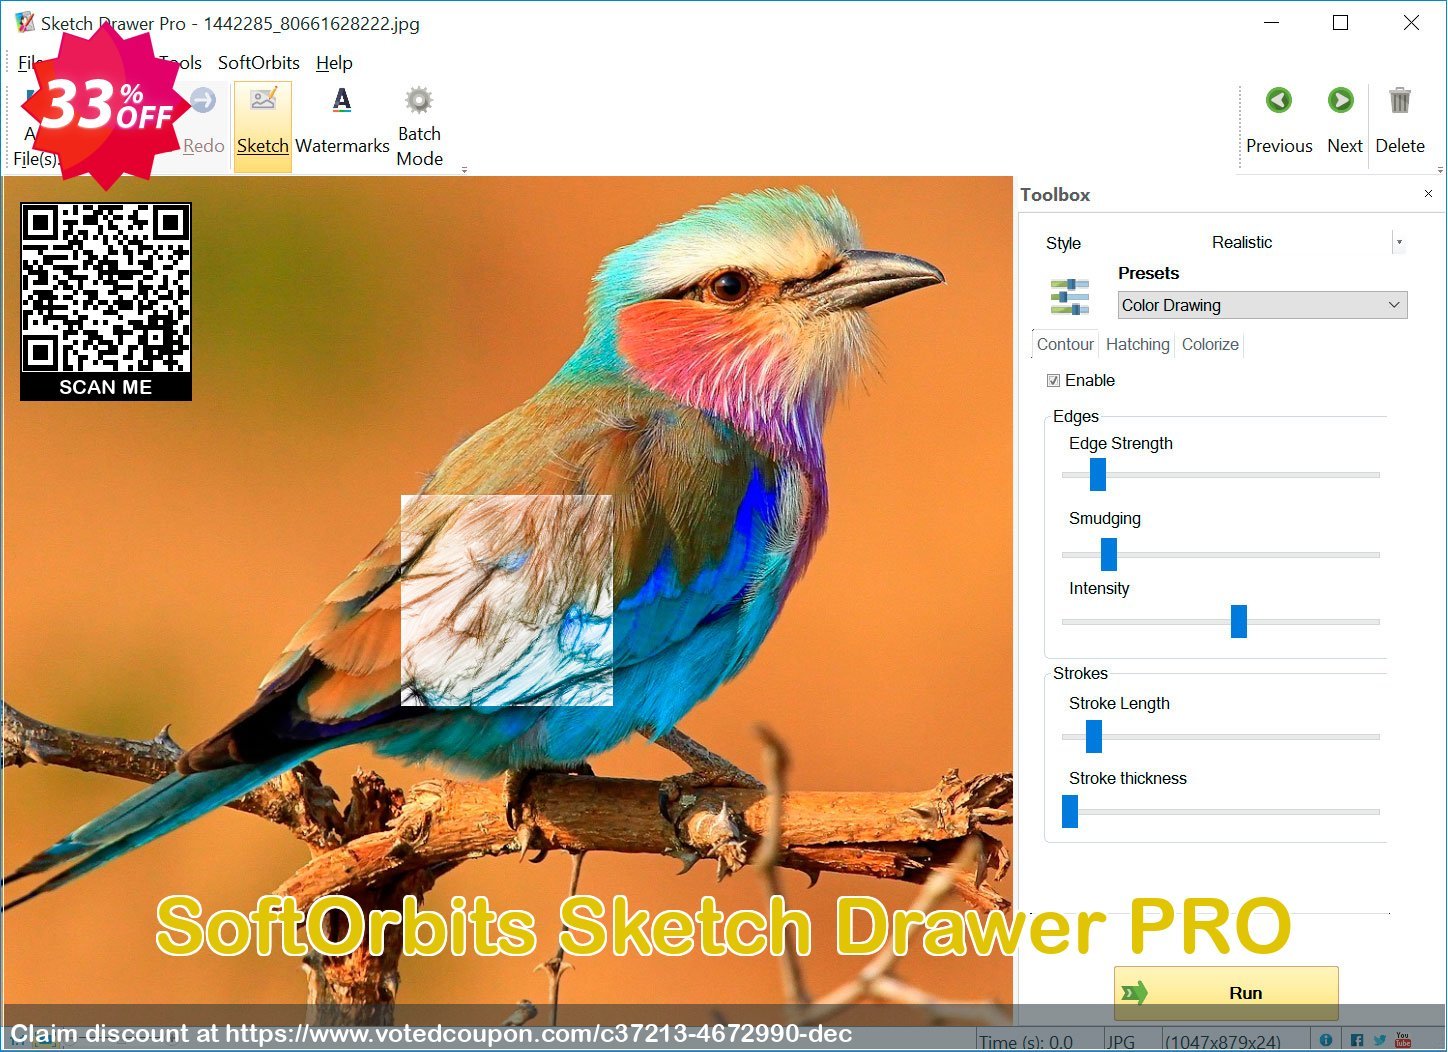 SoftOrbits Sketch Drawer PRO Coupon Code May 2024, 33% OFF - VotedCoupon